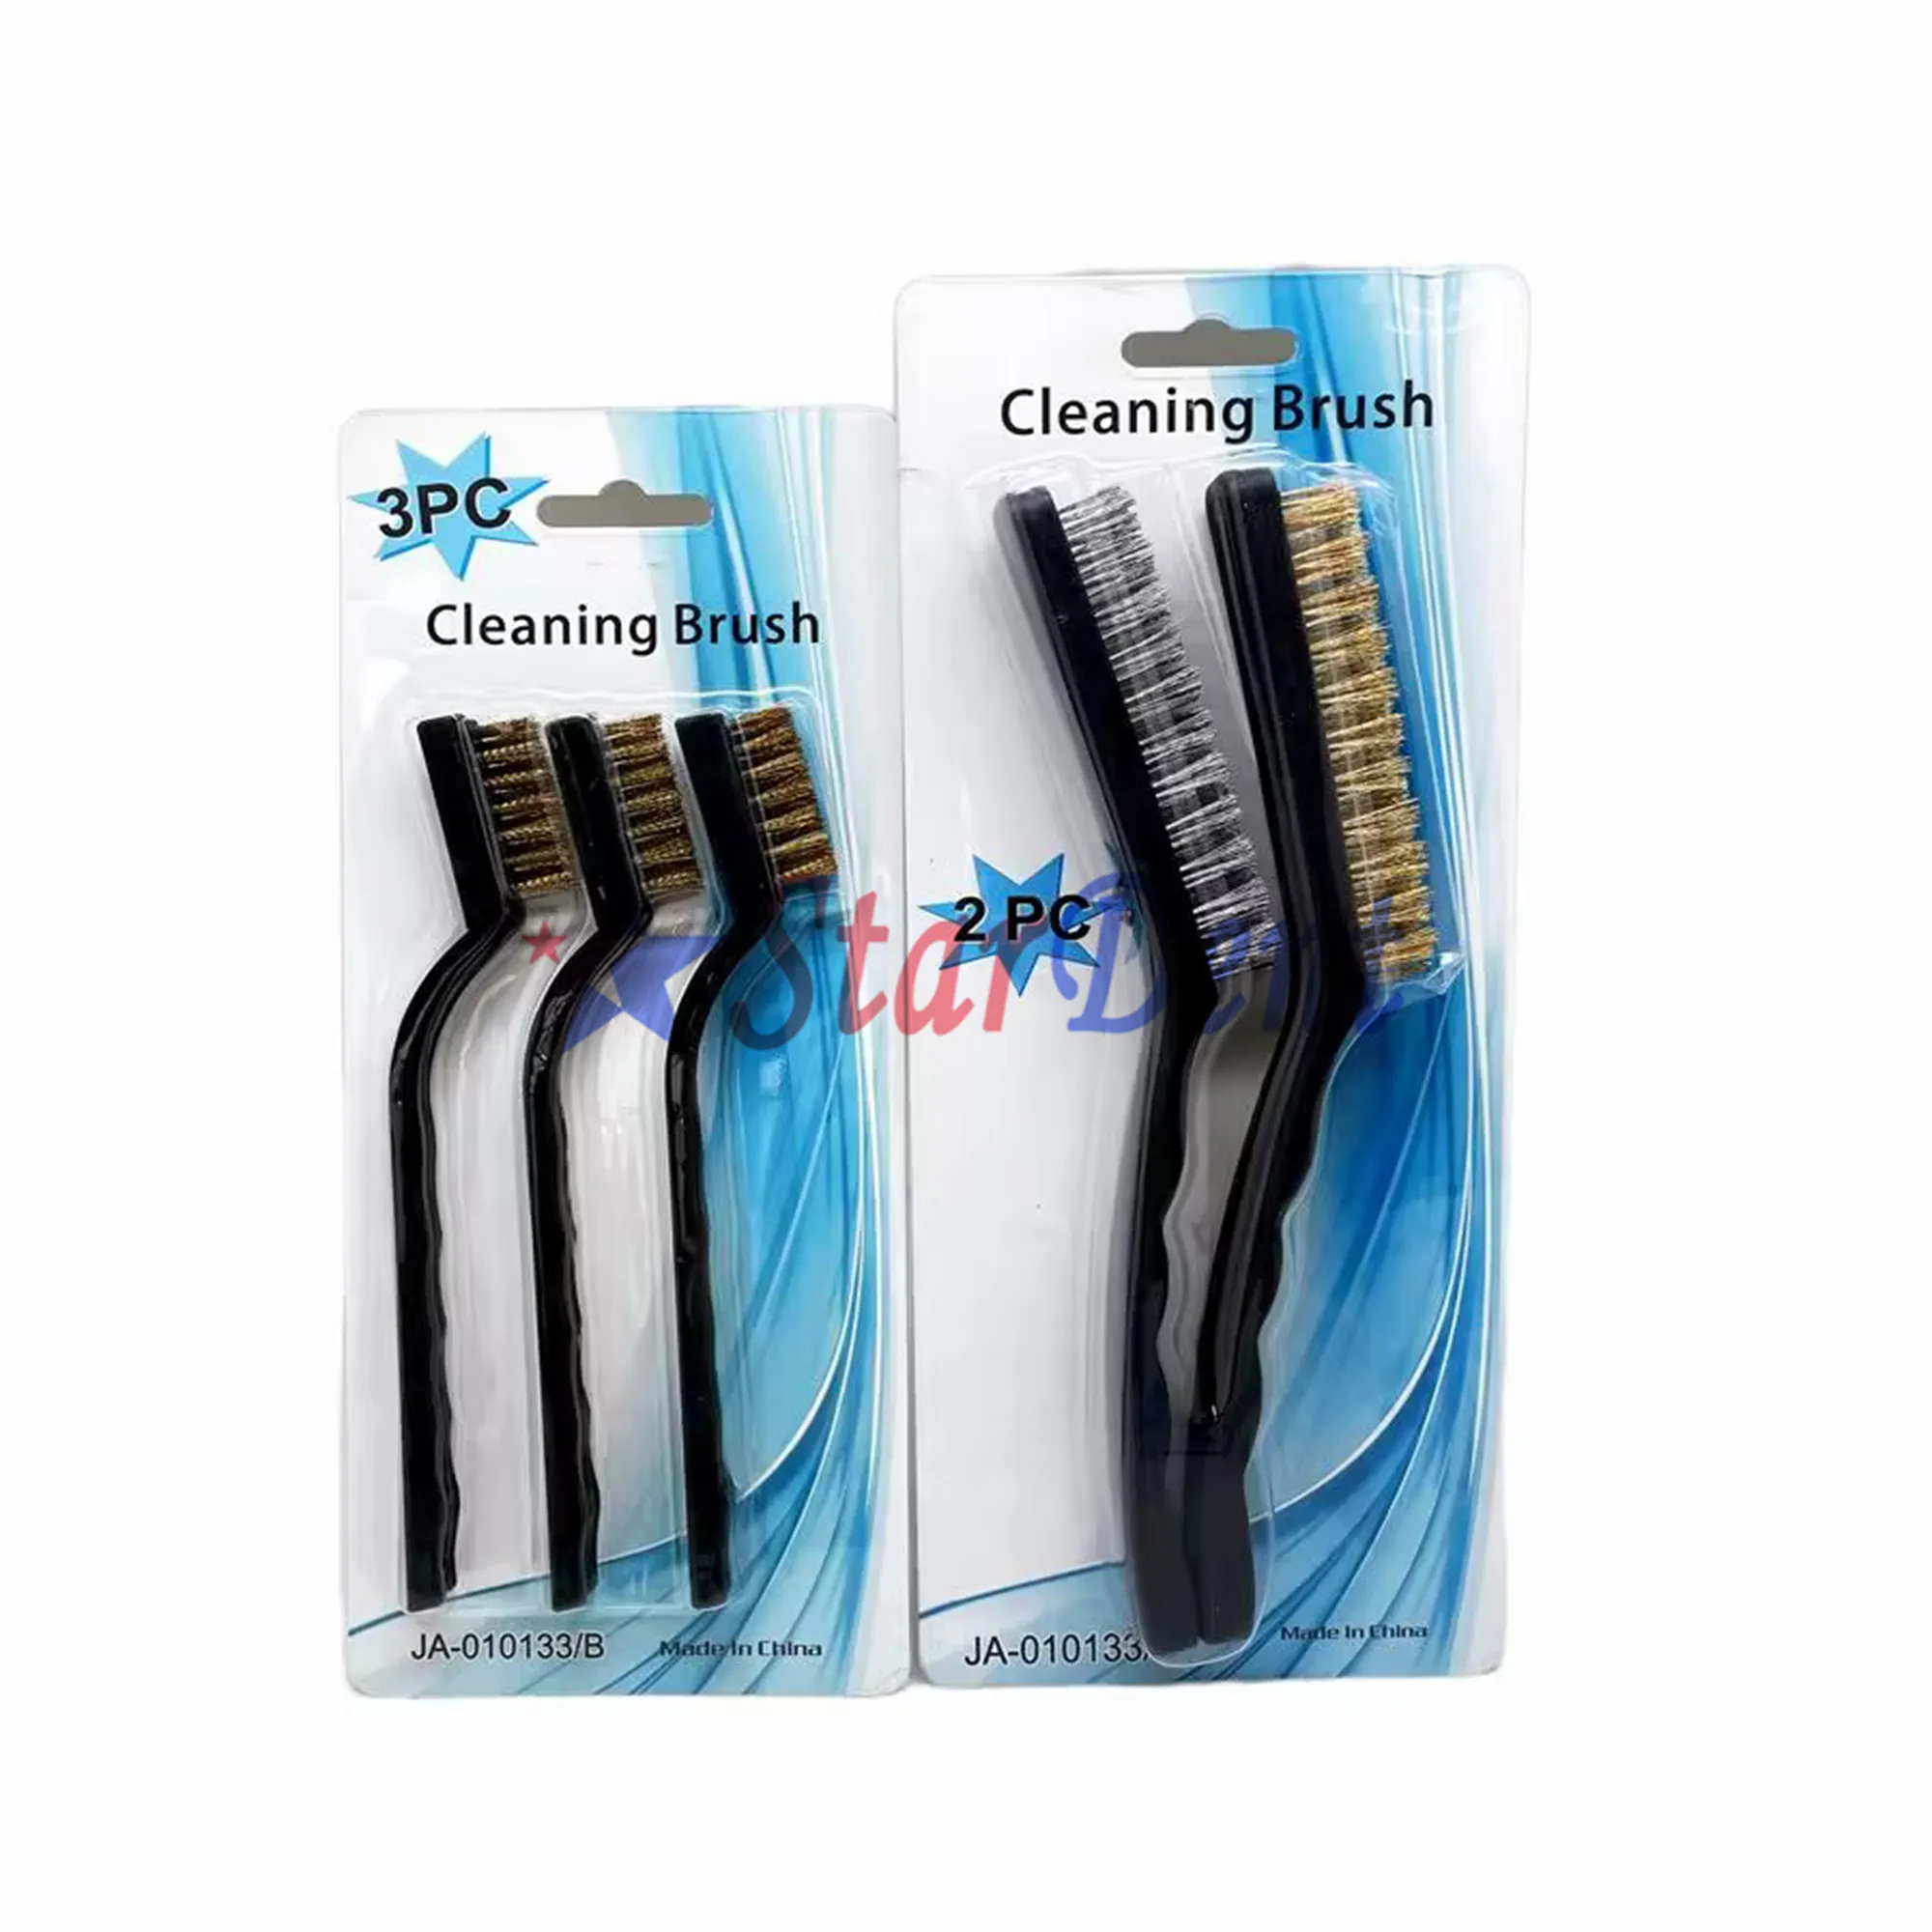 Dental cleaning brush Wire Brush Set for Cleaning Welding Slag and Rust, Stainless Steel Brass and Nylon